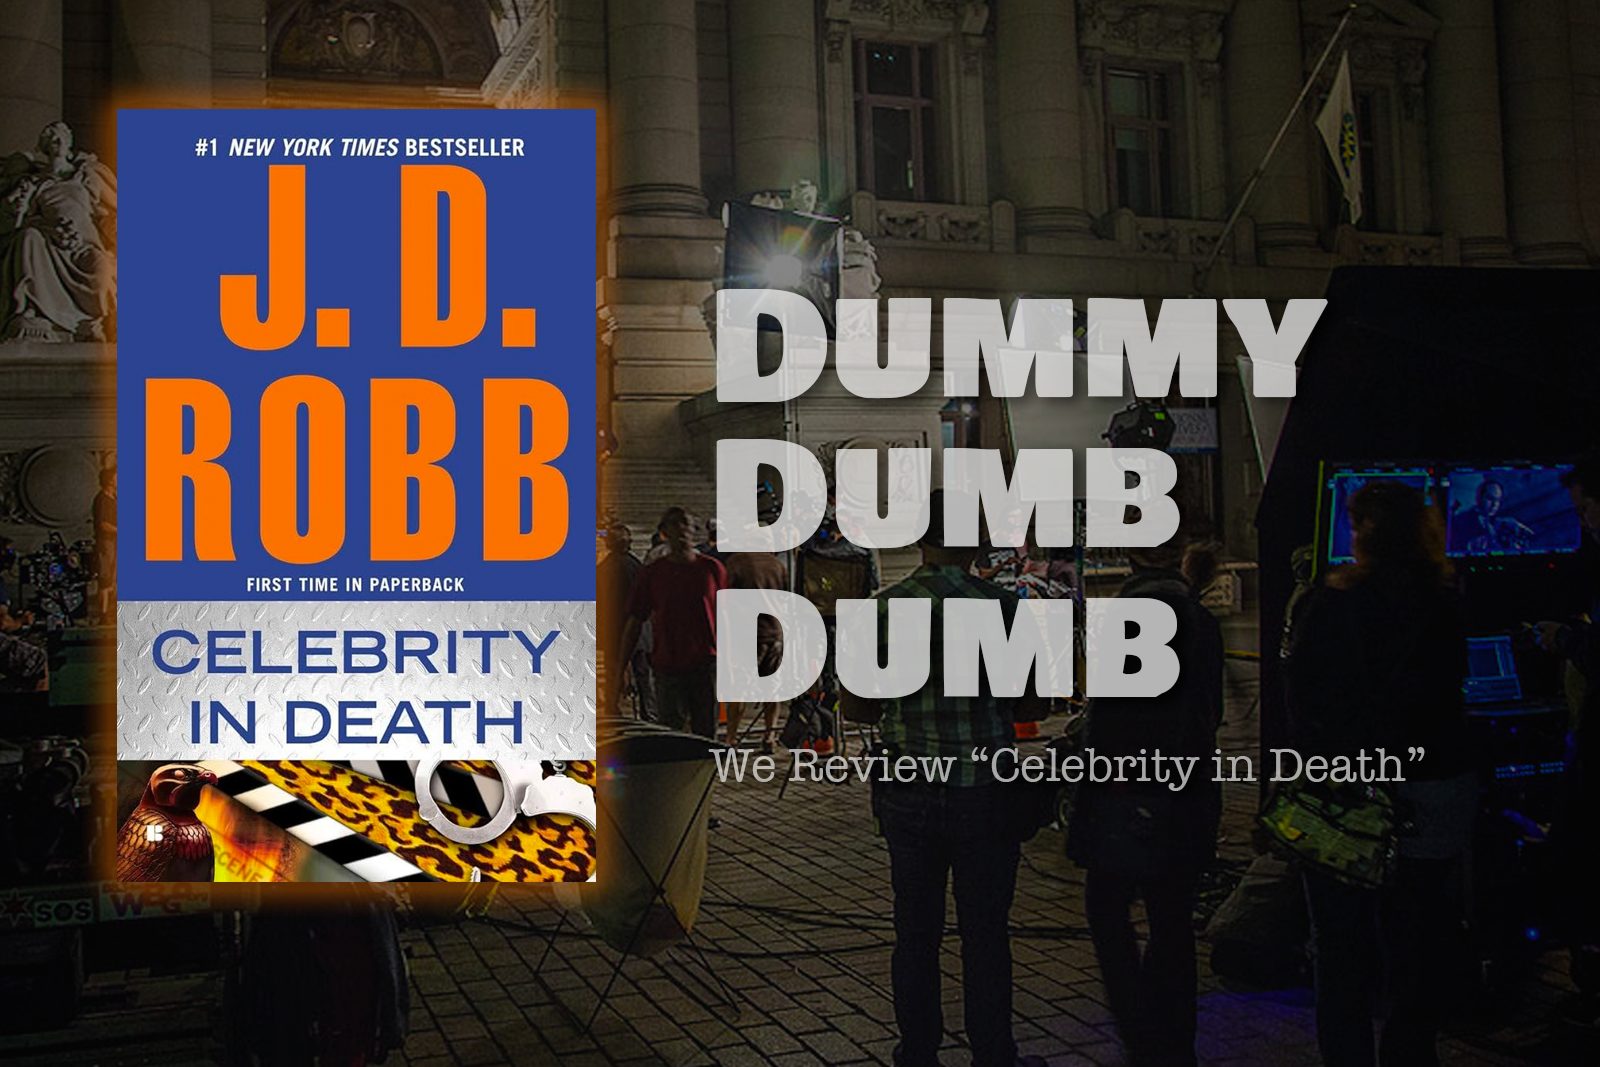 Dummy Dumb Dumb: We Review “Celebrity in Death”